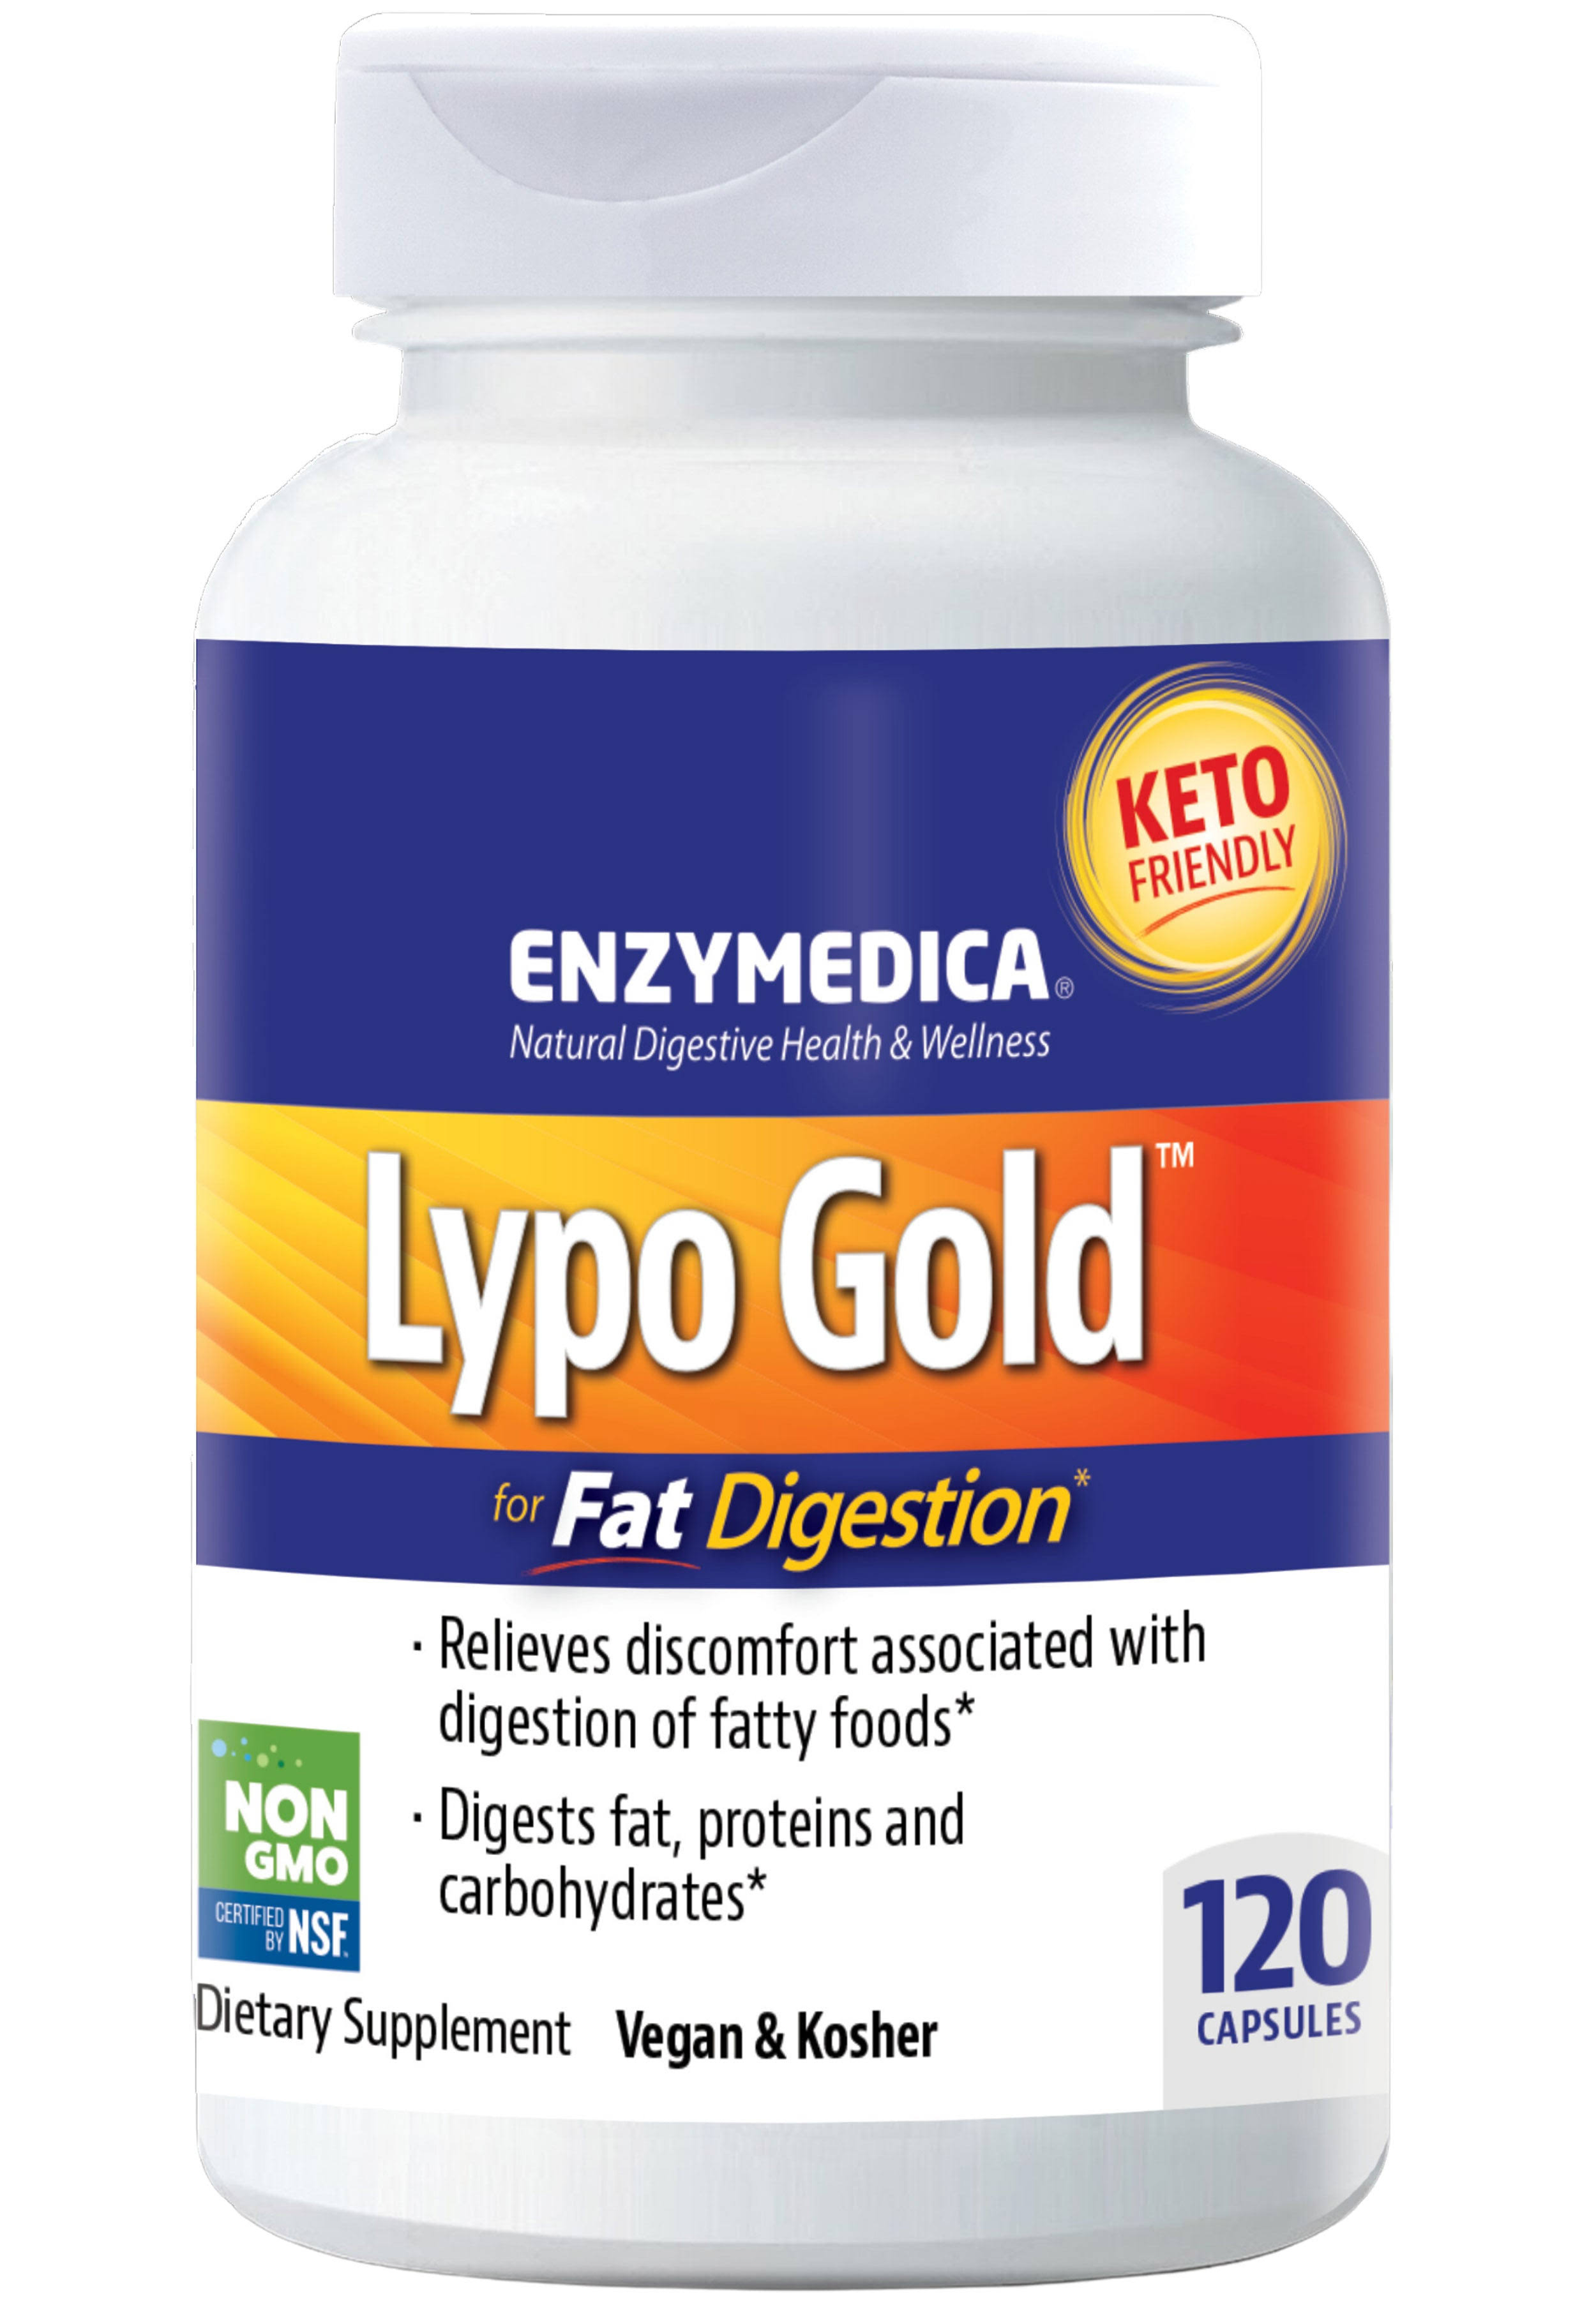 Enzymedica Lypo Gold Fat Digestion Supplement - 120 Capsules